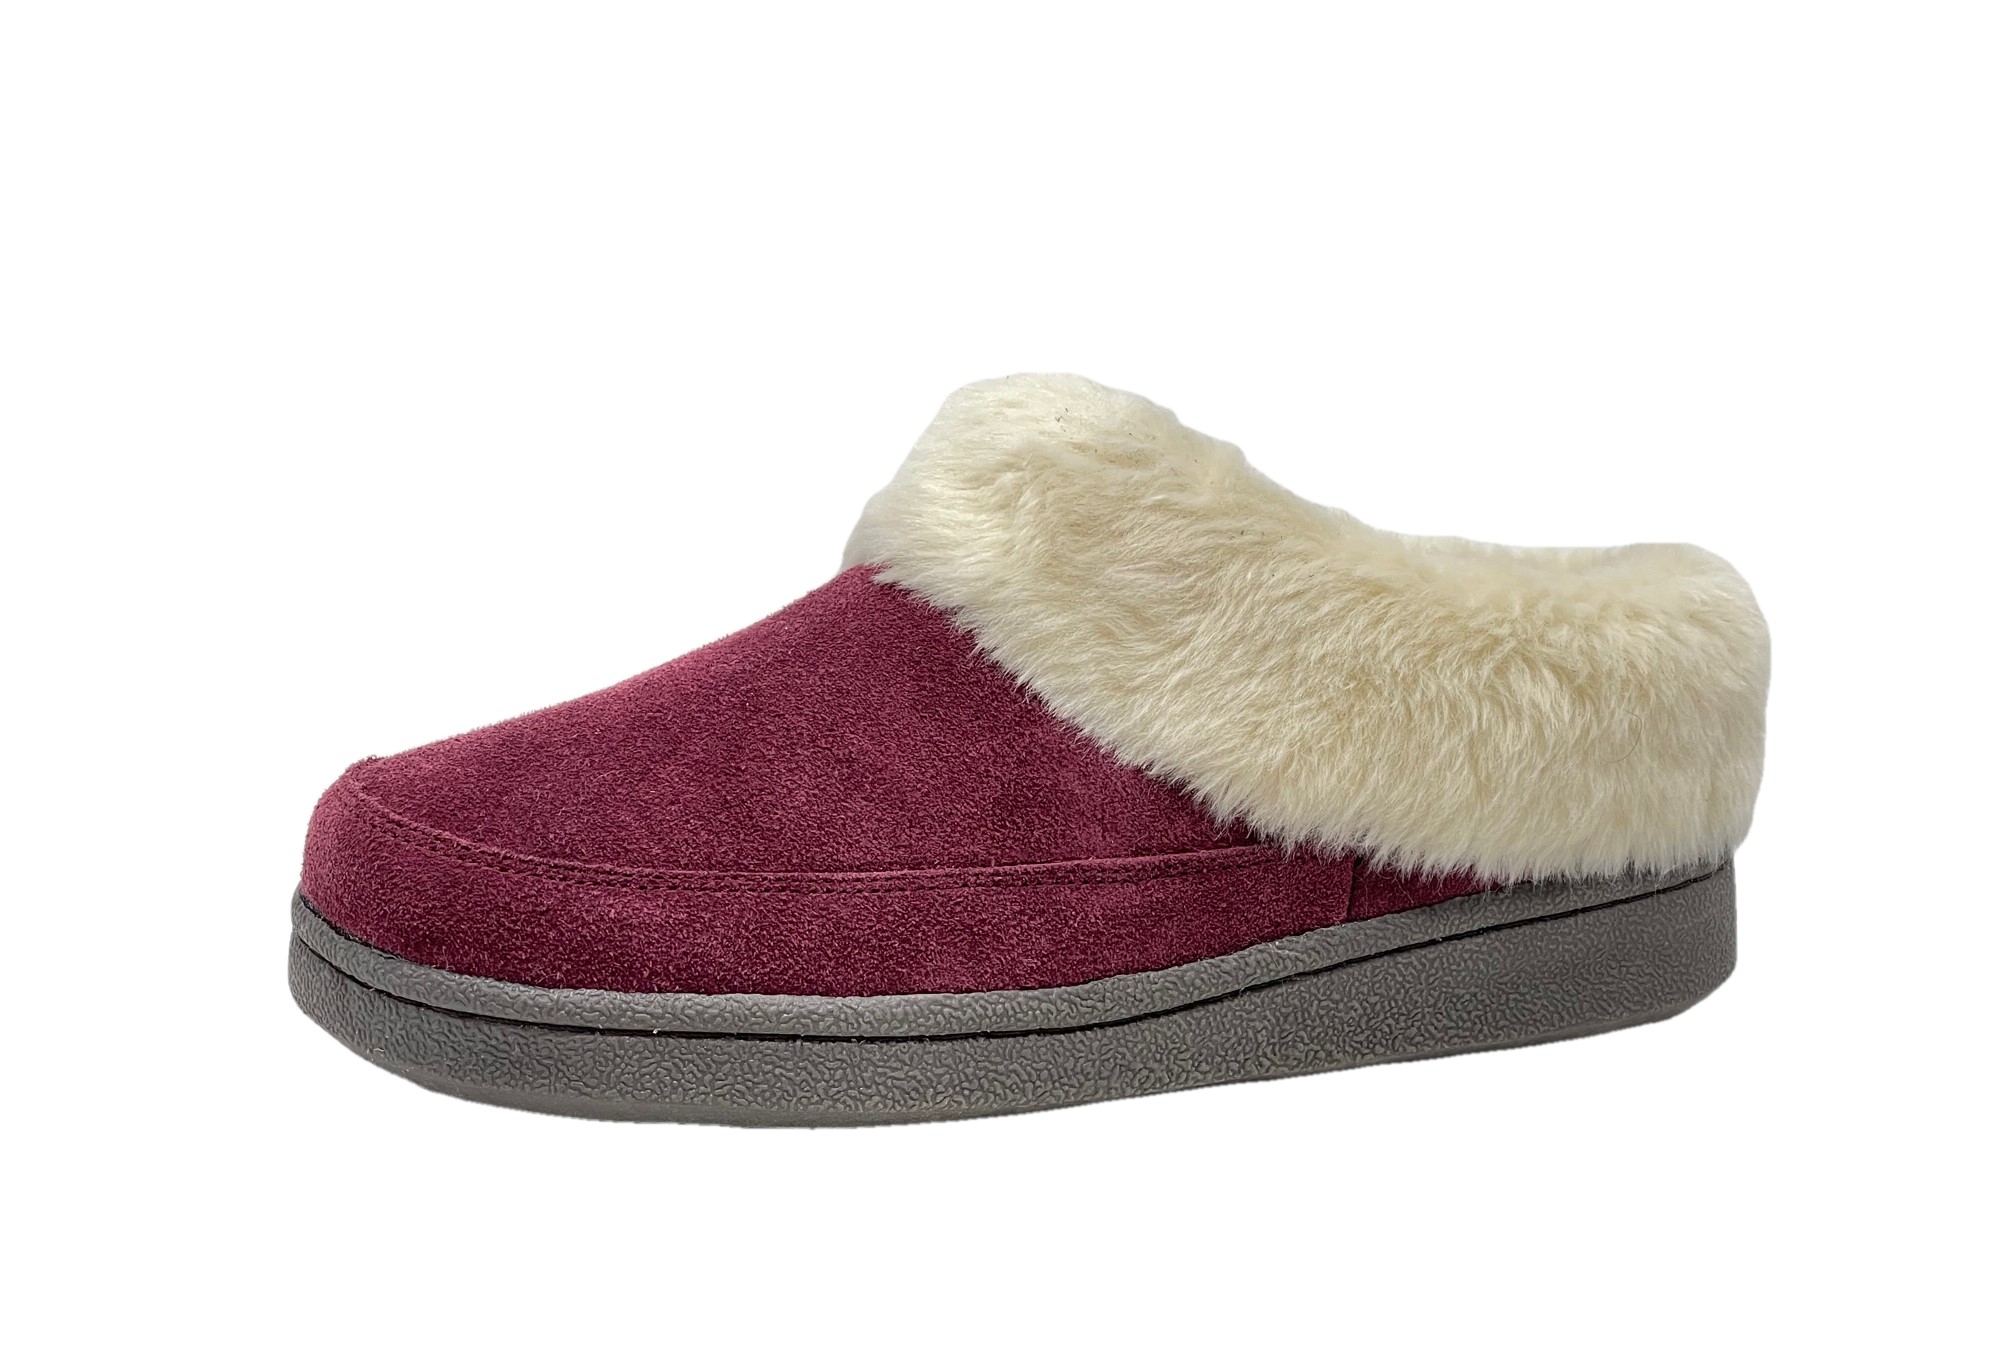 Ladies Womens Slippers Mule Slip On Fluffy Furry Comfy Cosy Indoor Shoes Size UK 